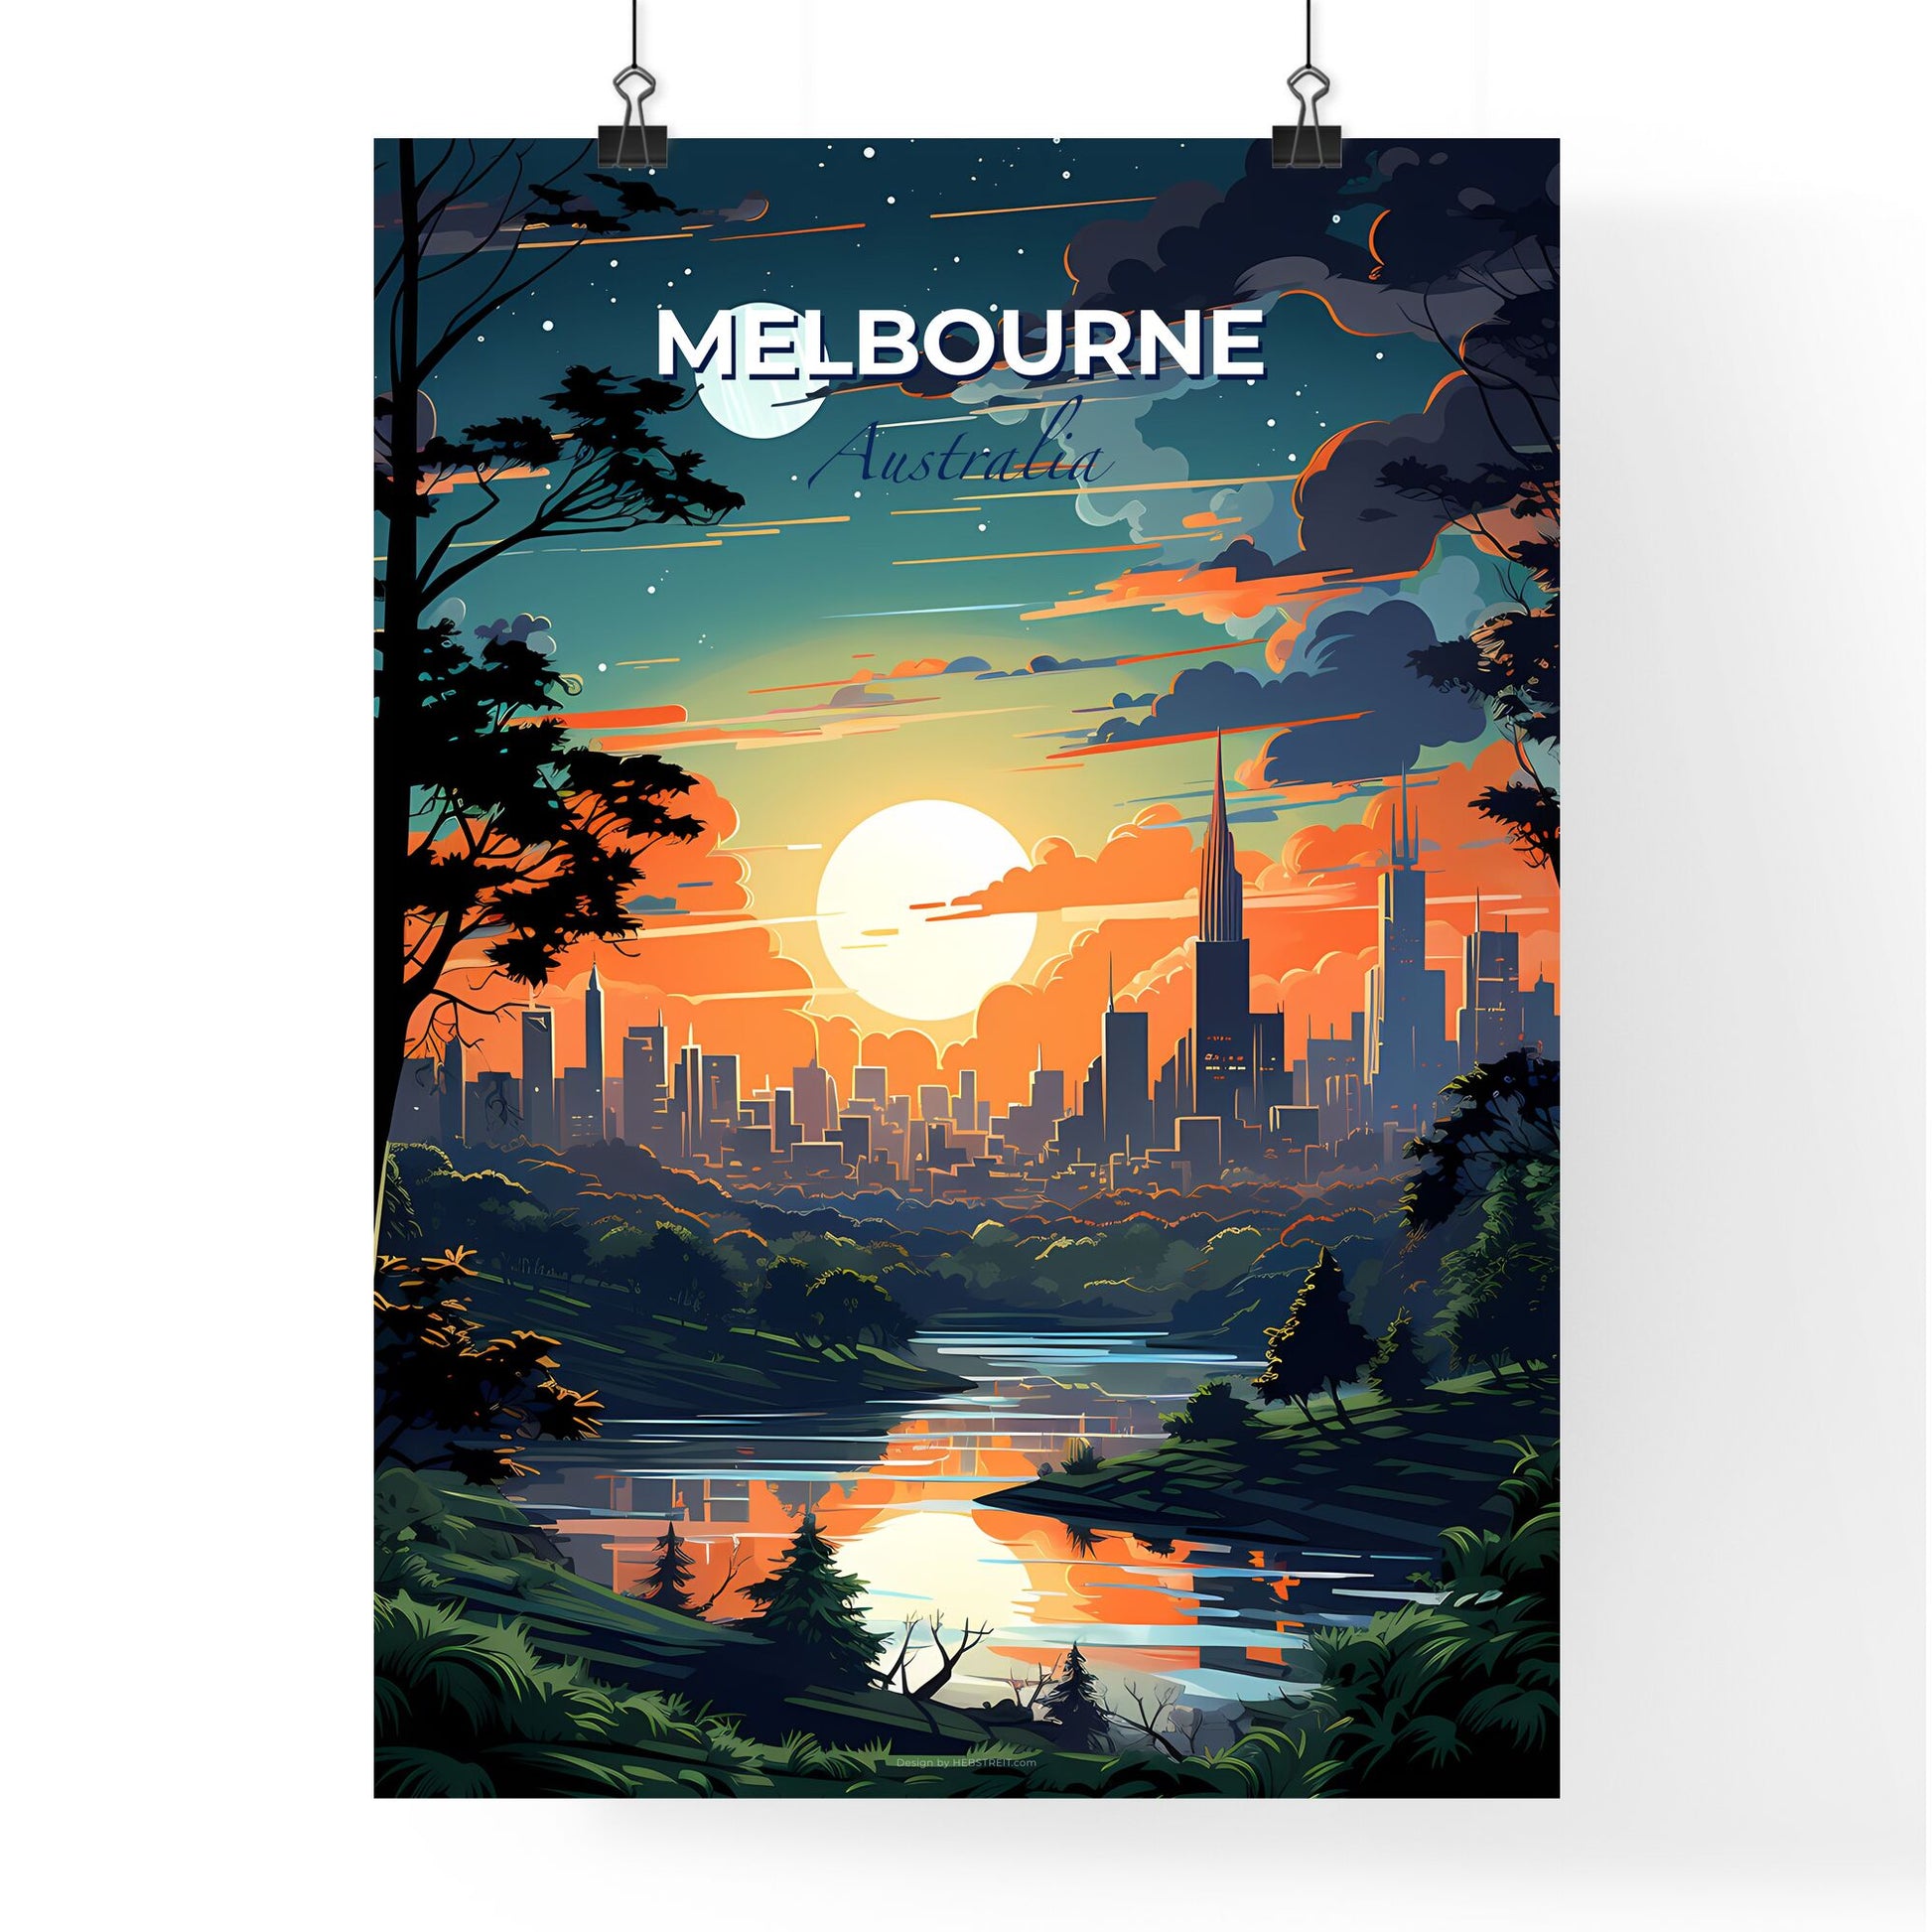 Impressive Artistic Melbourne Cityscape with River and Greenery Default Title